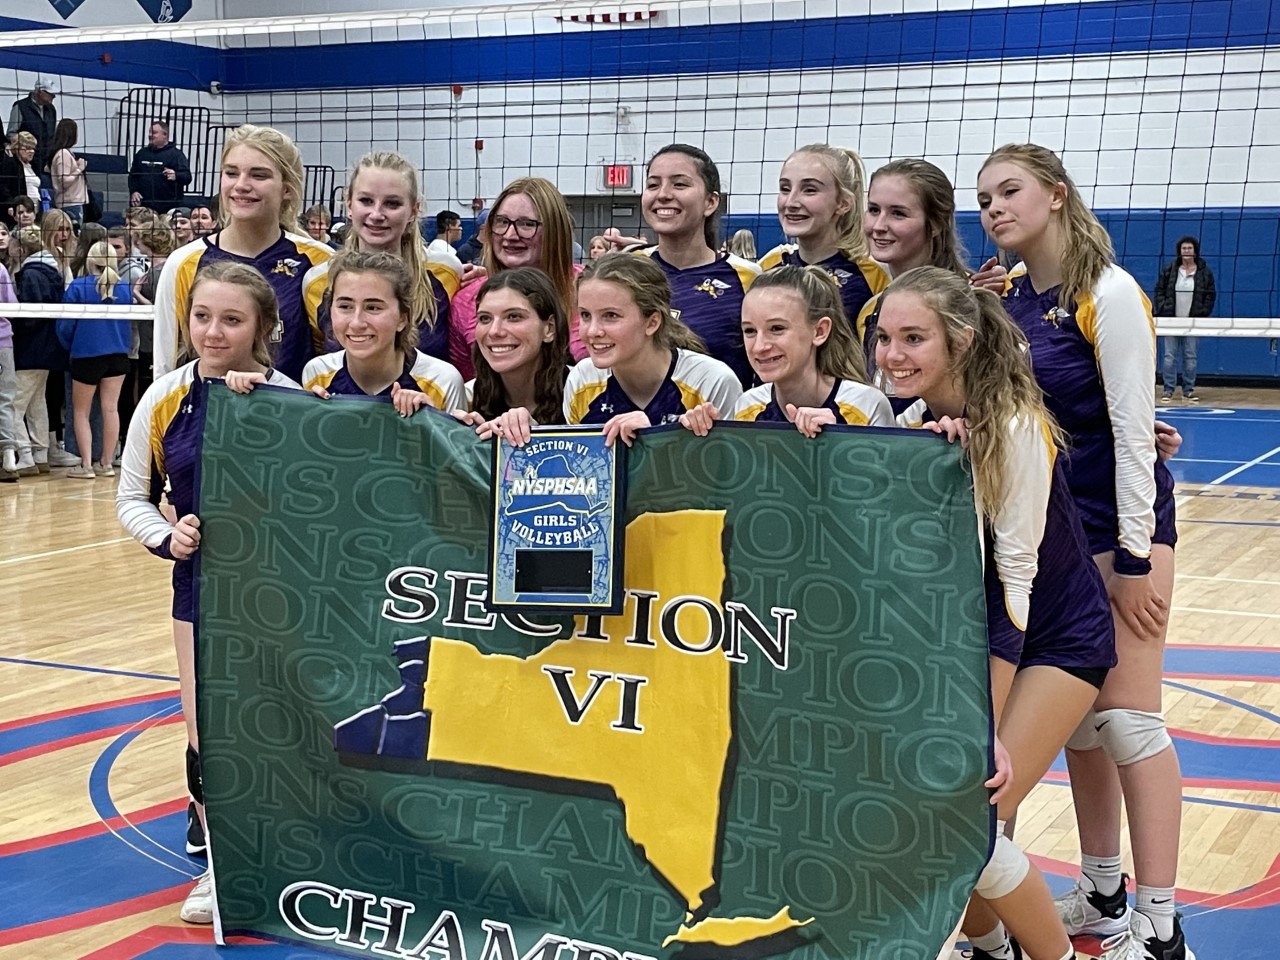 Volleyball won their Section VI Division.